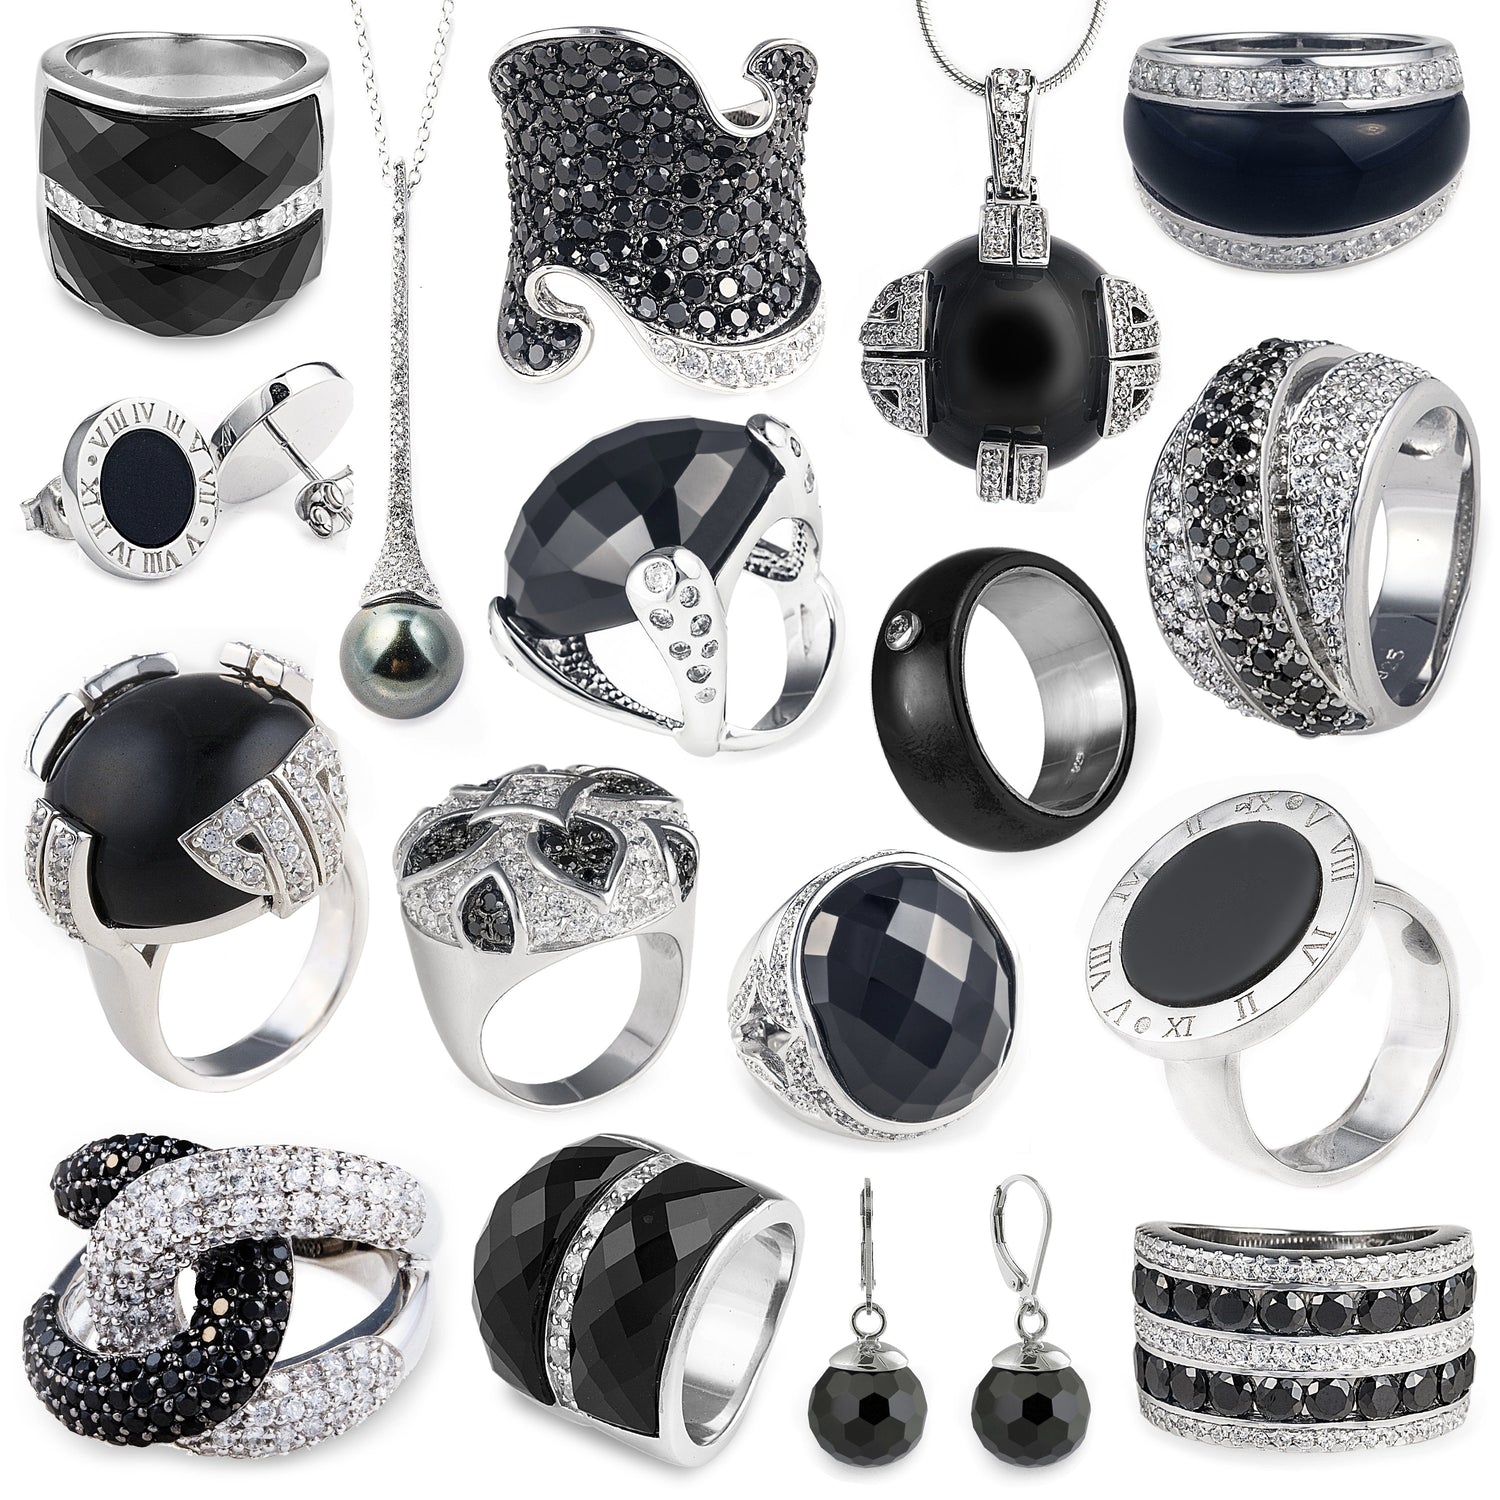 Black coloured jewellery by Bellagio & Co. 925 Sterling Silver. Worldwide Shipping from Australia